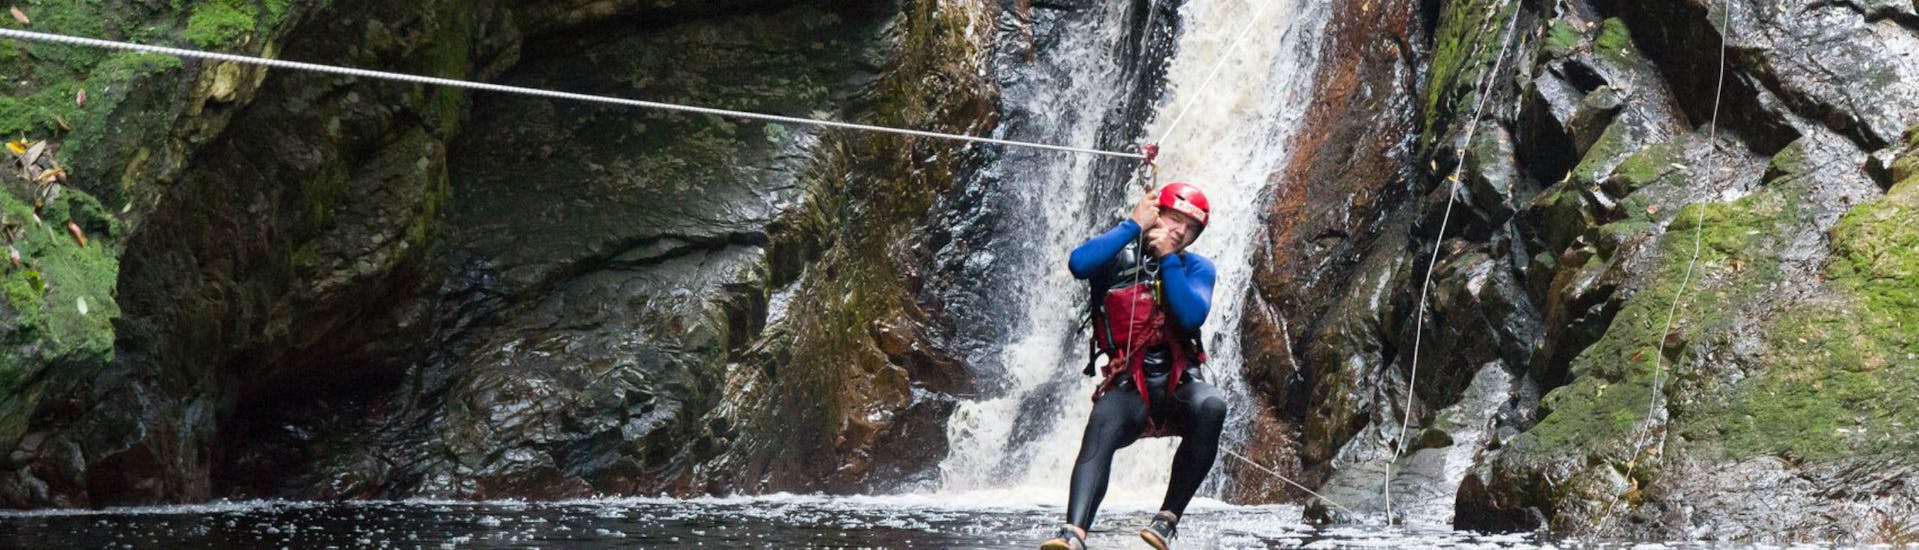 canyoning-in-the-crags-standard-full-monty-tour-africanyon-hero